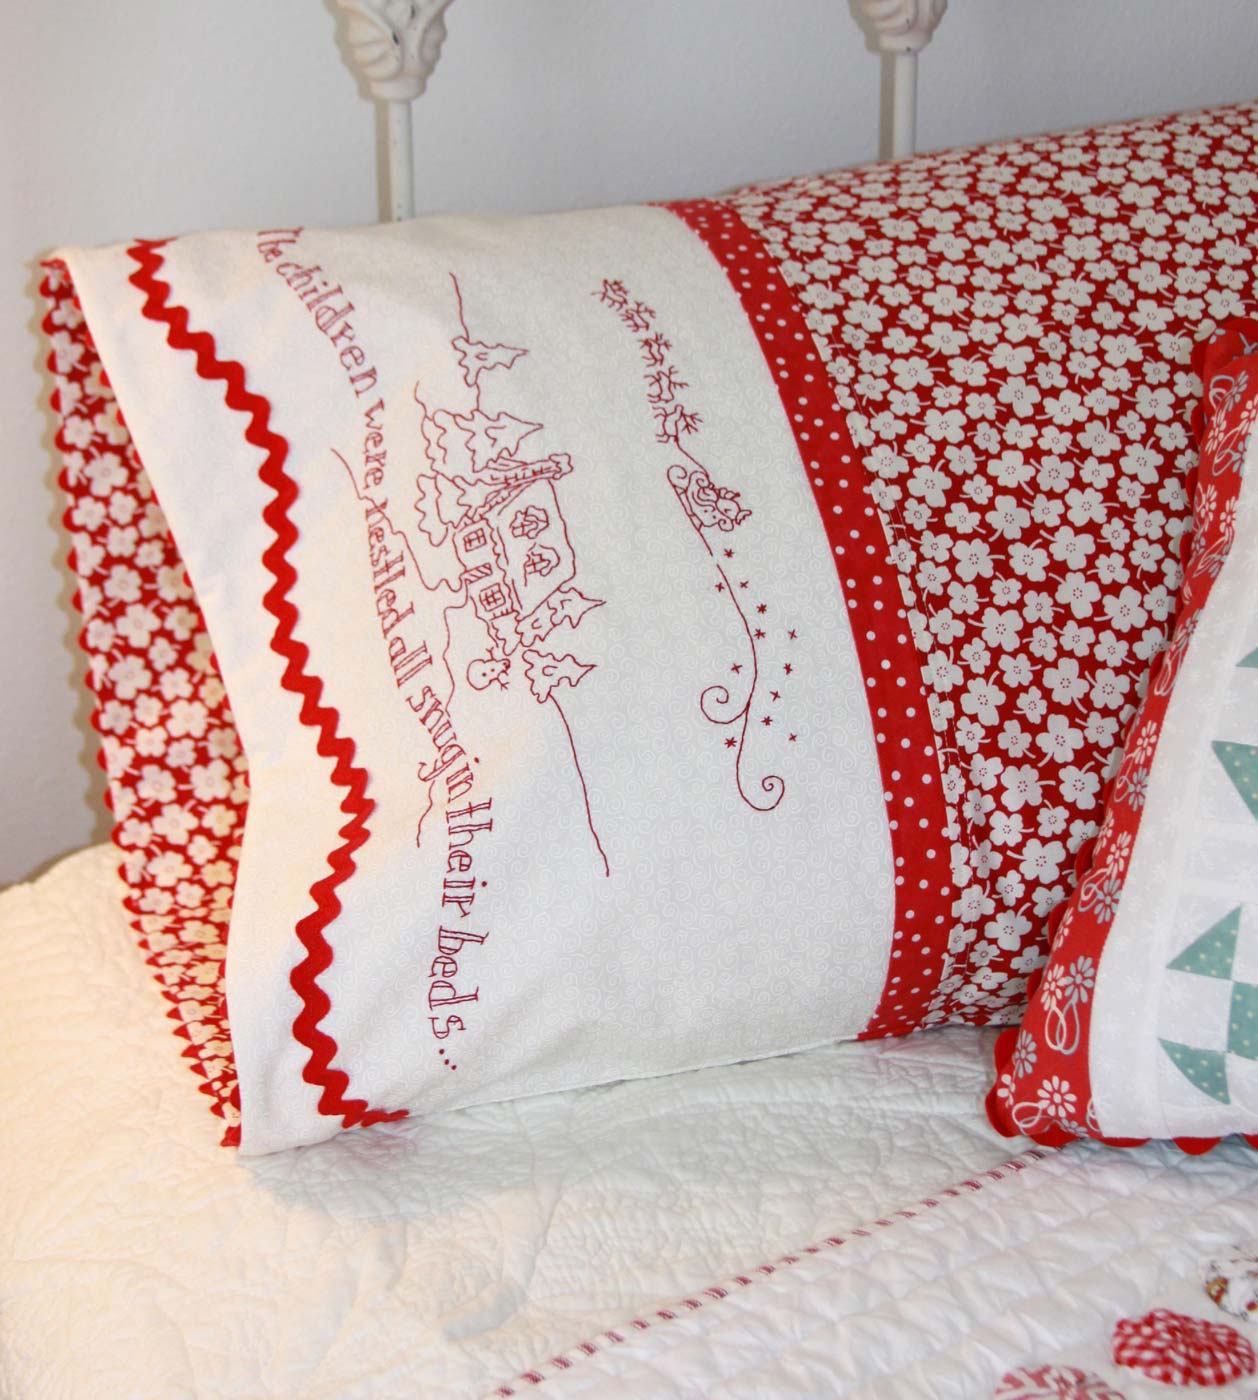 Hand Embroidery Patterns For Pillowcases The Night Before Christmas Pillowcase